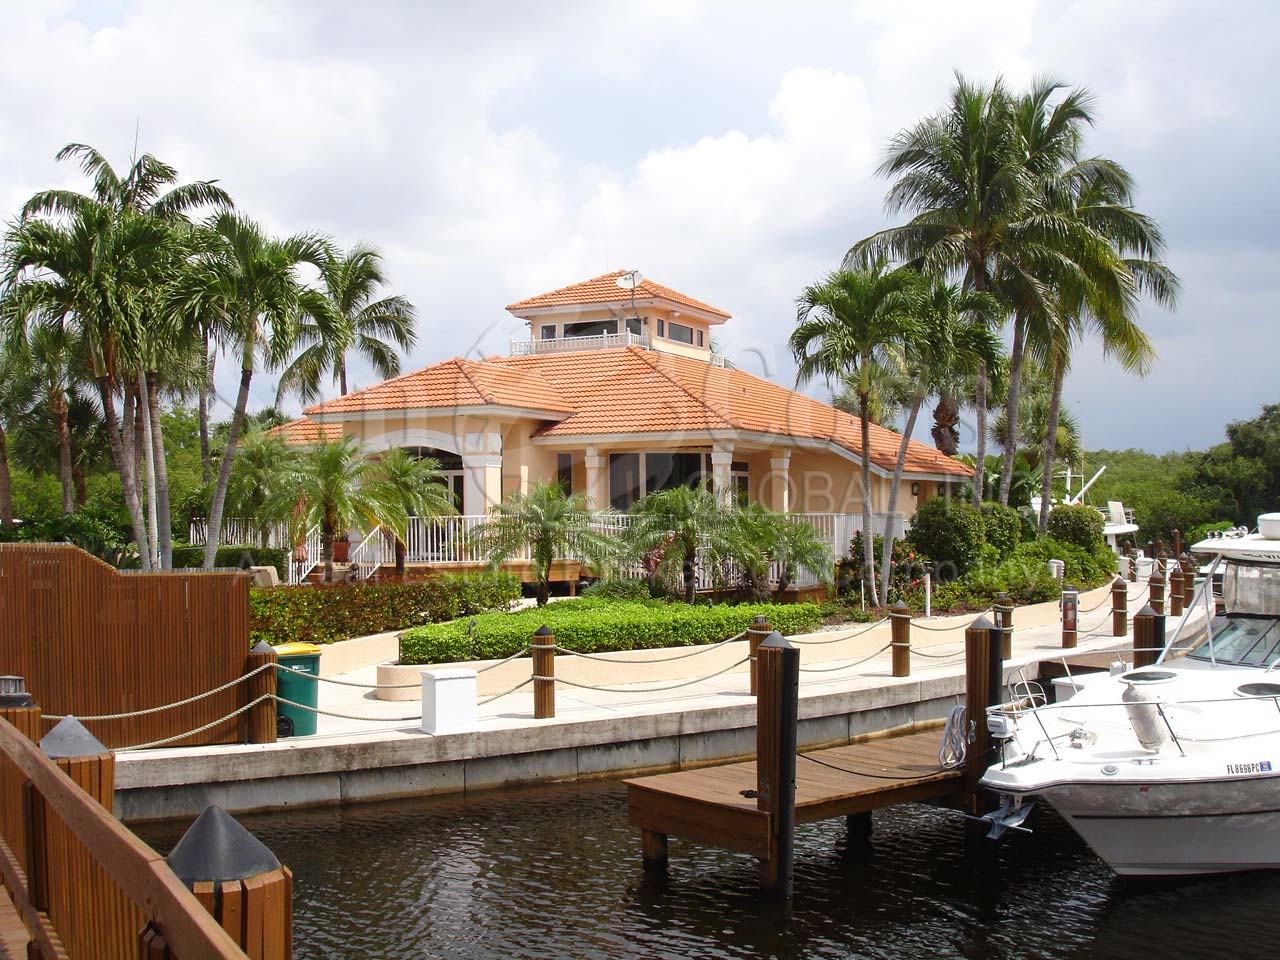 WINDSTAR Southpointe Yacht Club clubhouse